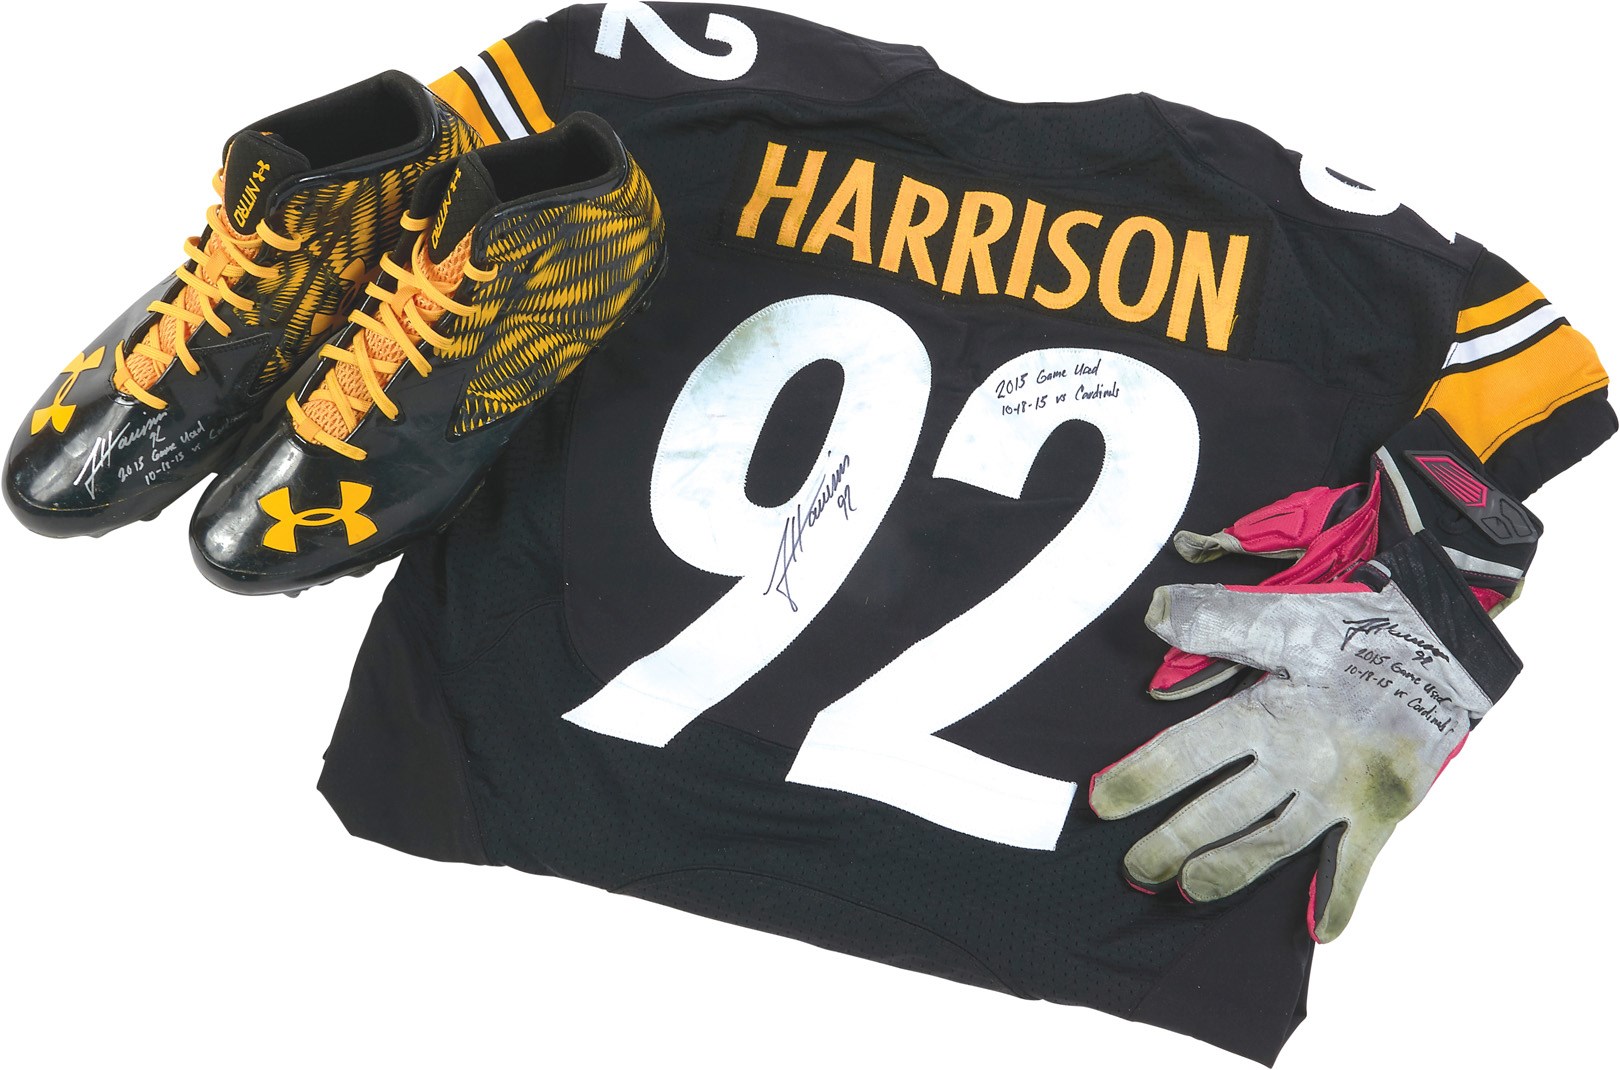 Football - October 18, 2015 James Harrison Pittsburgh Steelers Game Worn Jersey, Cleats and Gloves (Photo-Matched, Harrison Letters)